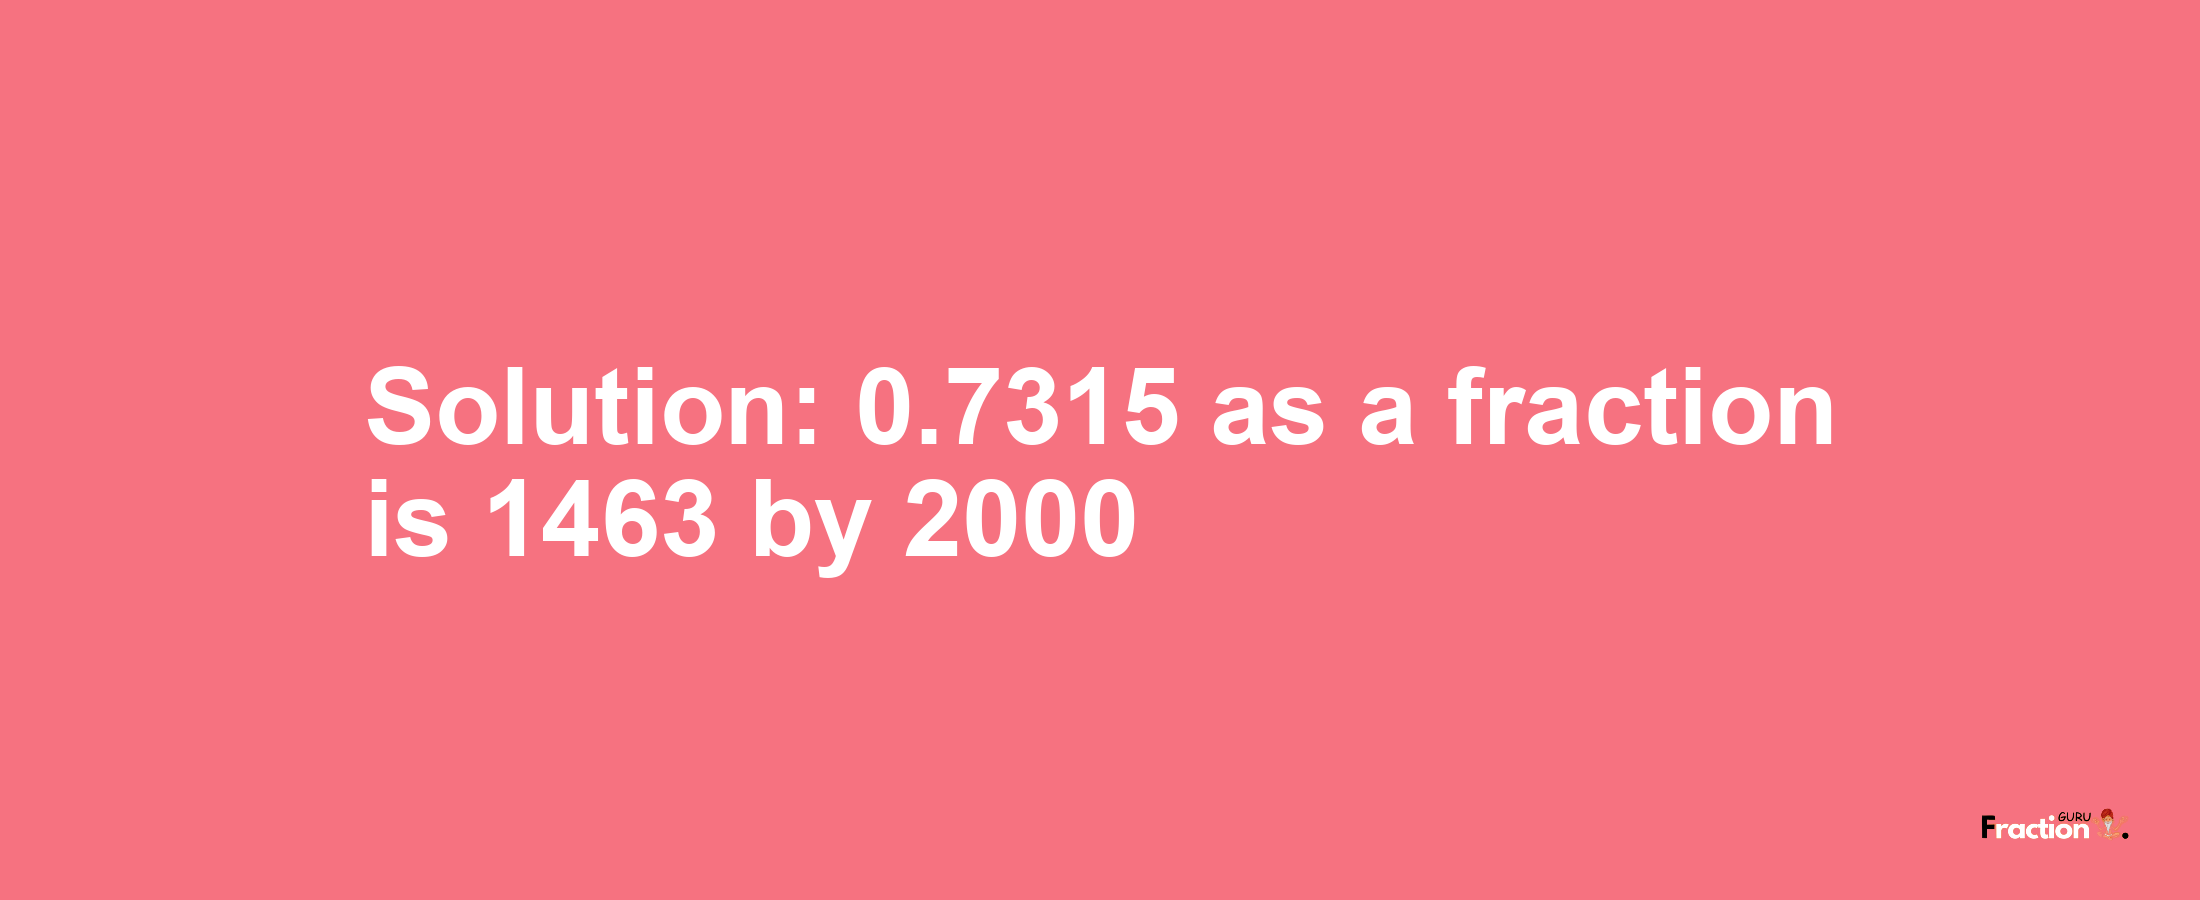 Solution:0.7315 as a fraction is 1463/2000